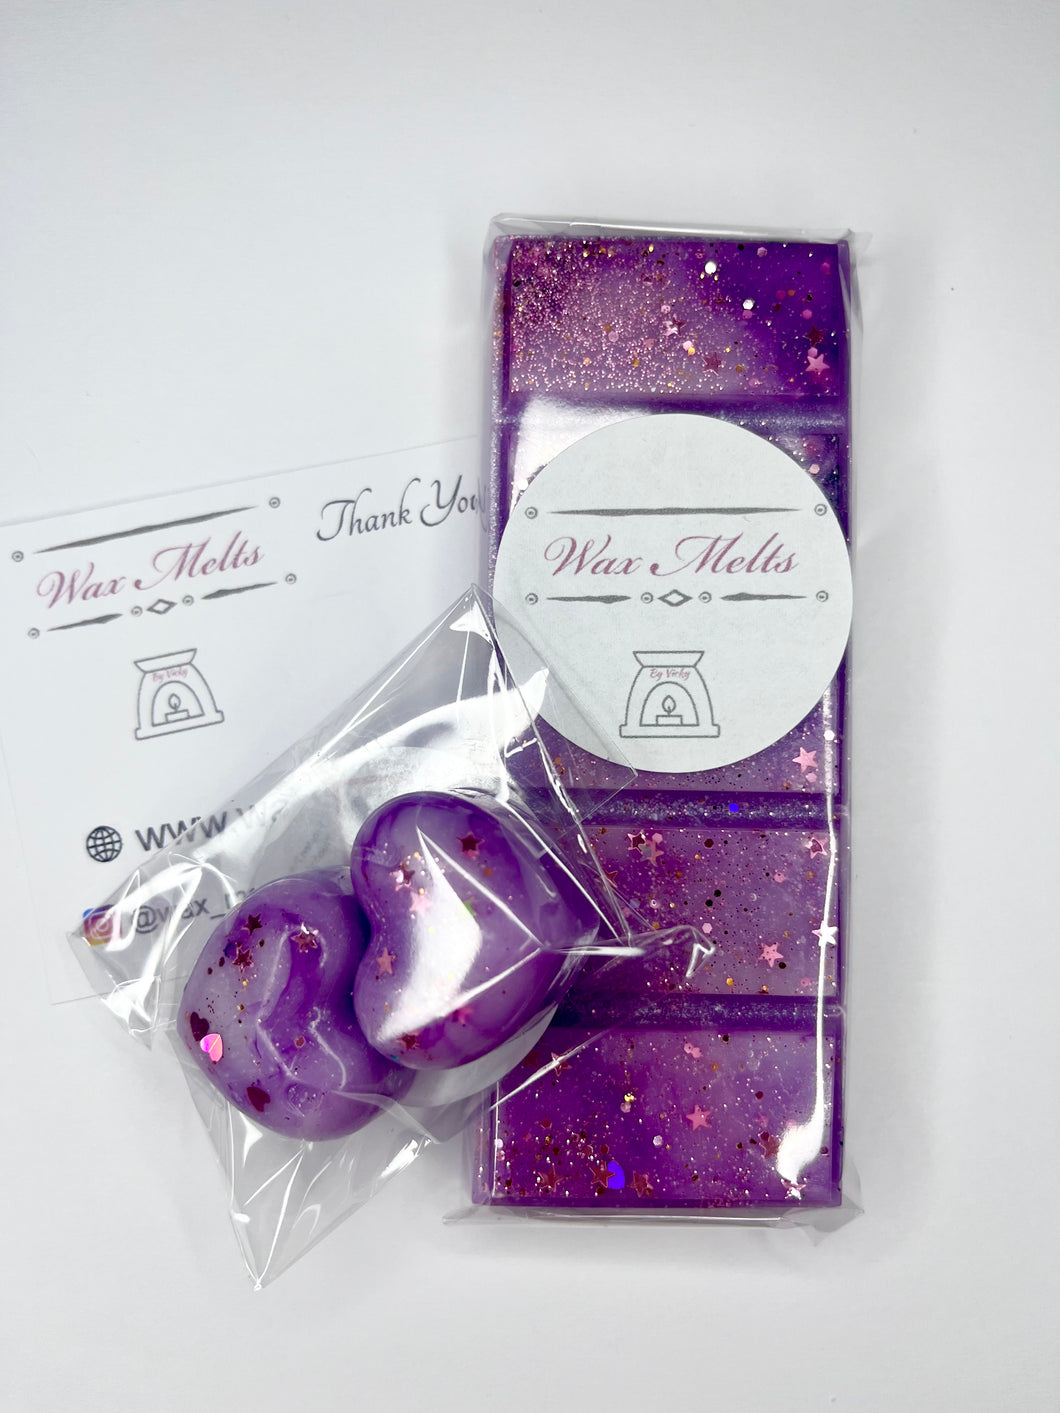 NEW!! Frosted Rose Wonderland snap bar & hearts